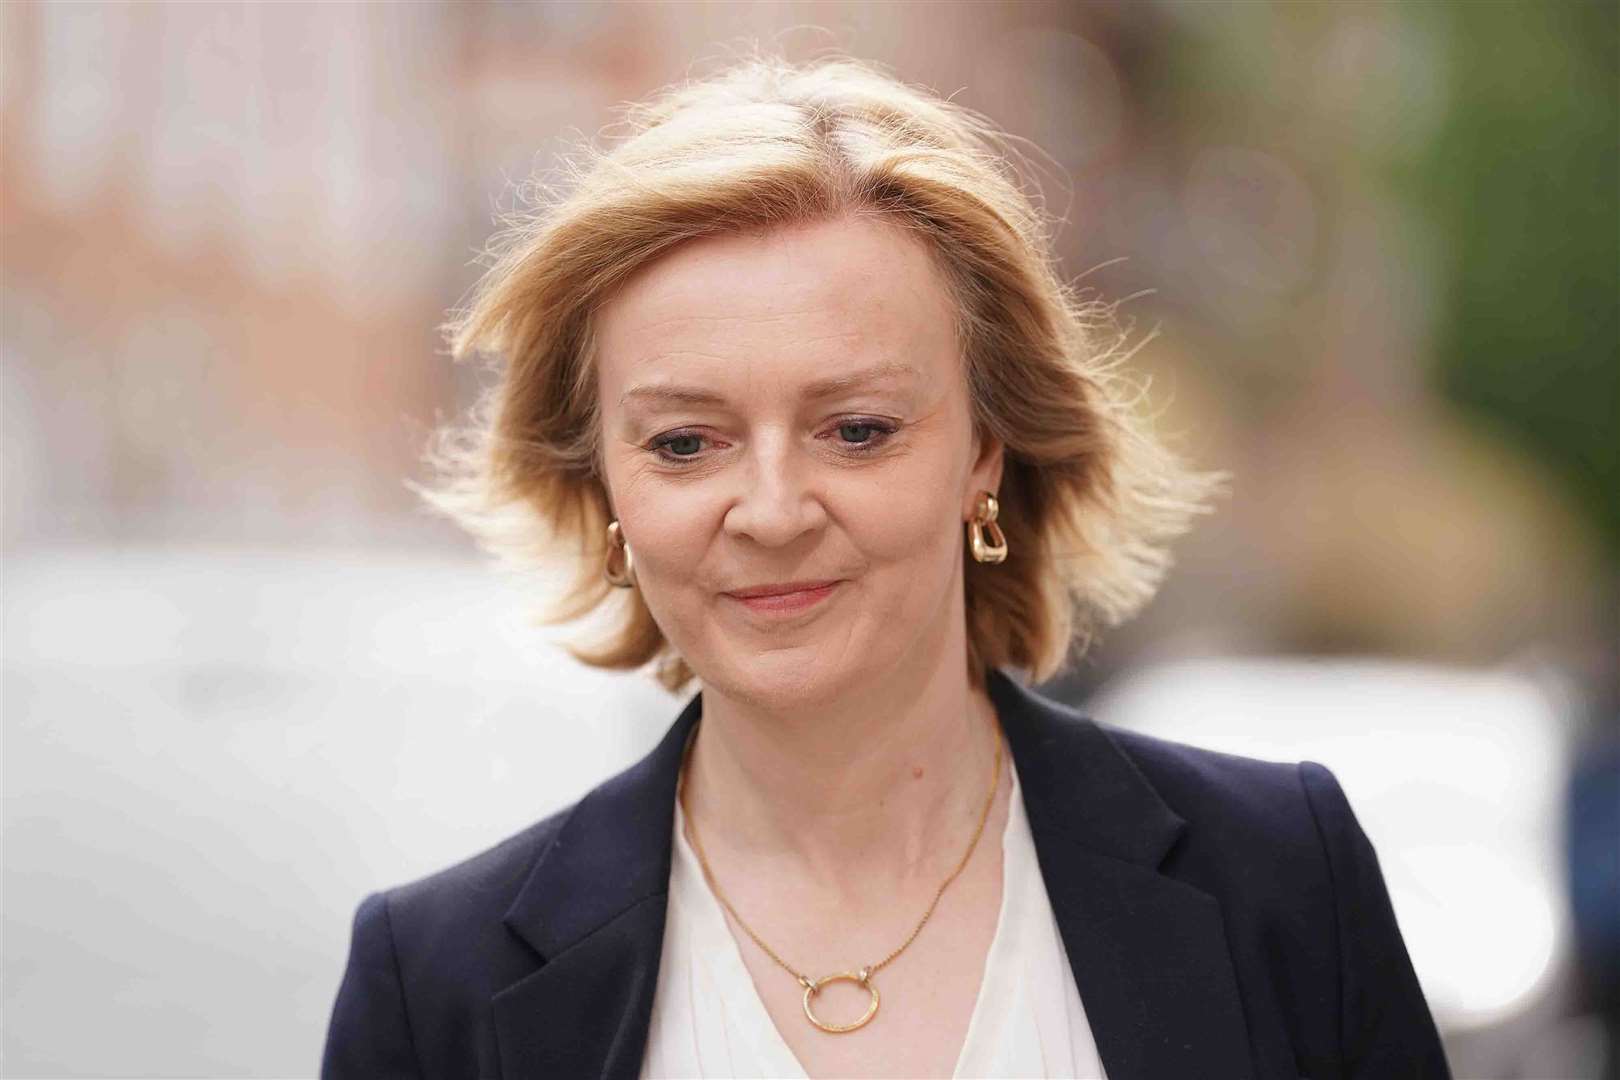 Foreign Secretary Liz Truss said she is still considering whether to lift the suspension on Oxfam receiving UK aid funding (Kirsty O’Connor/PA)